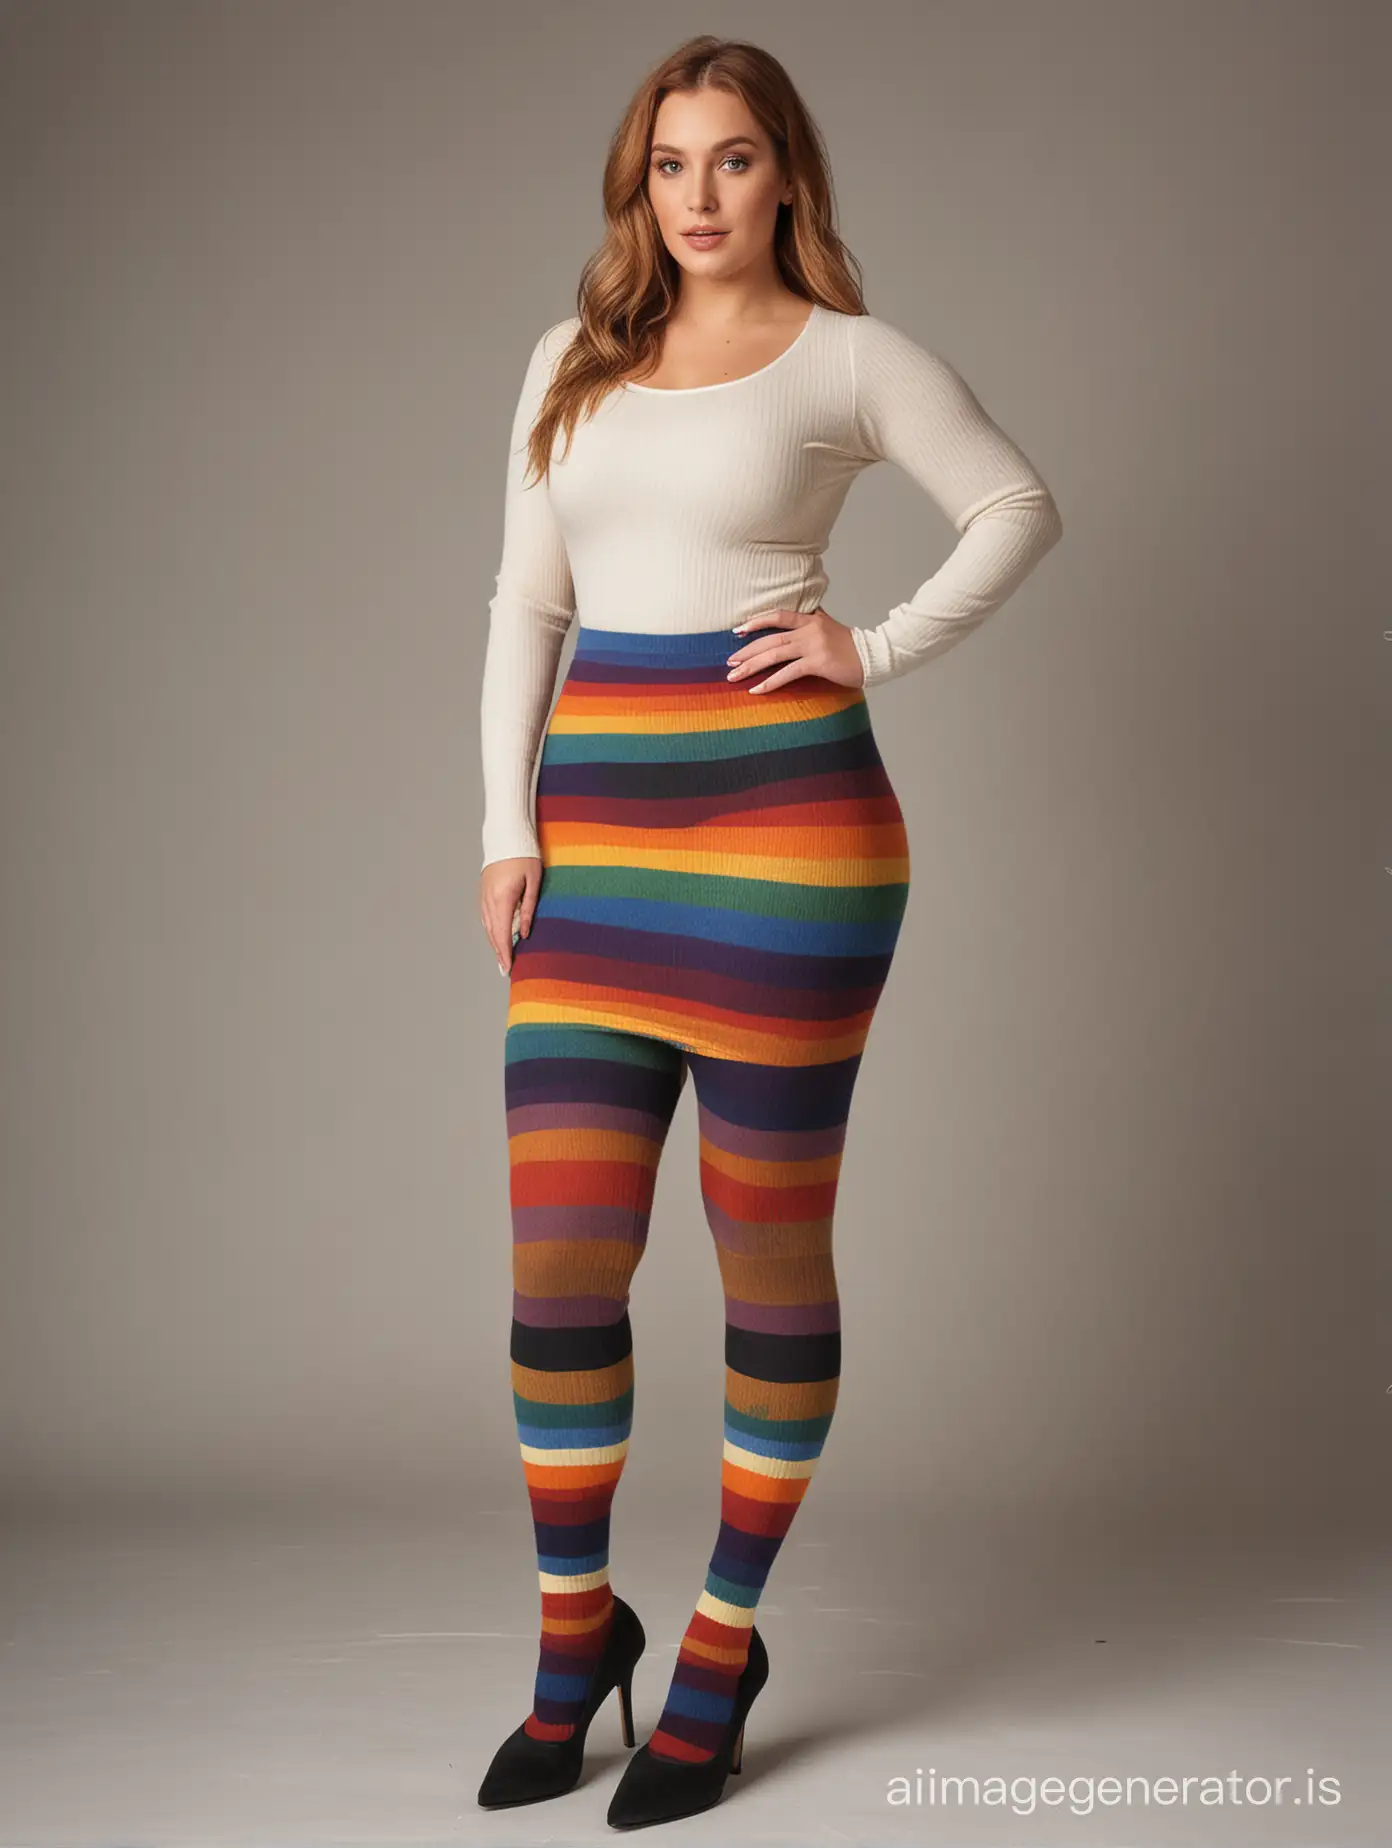 curvy woman full body "extra thick ribbed rainbow wool tights" "short skirt"